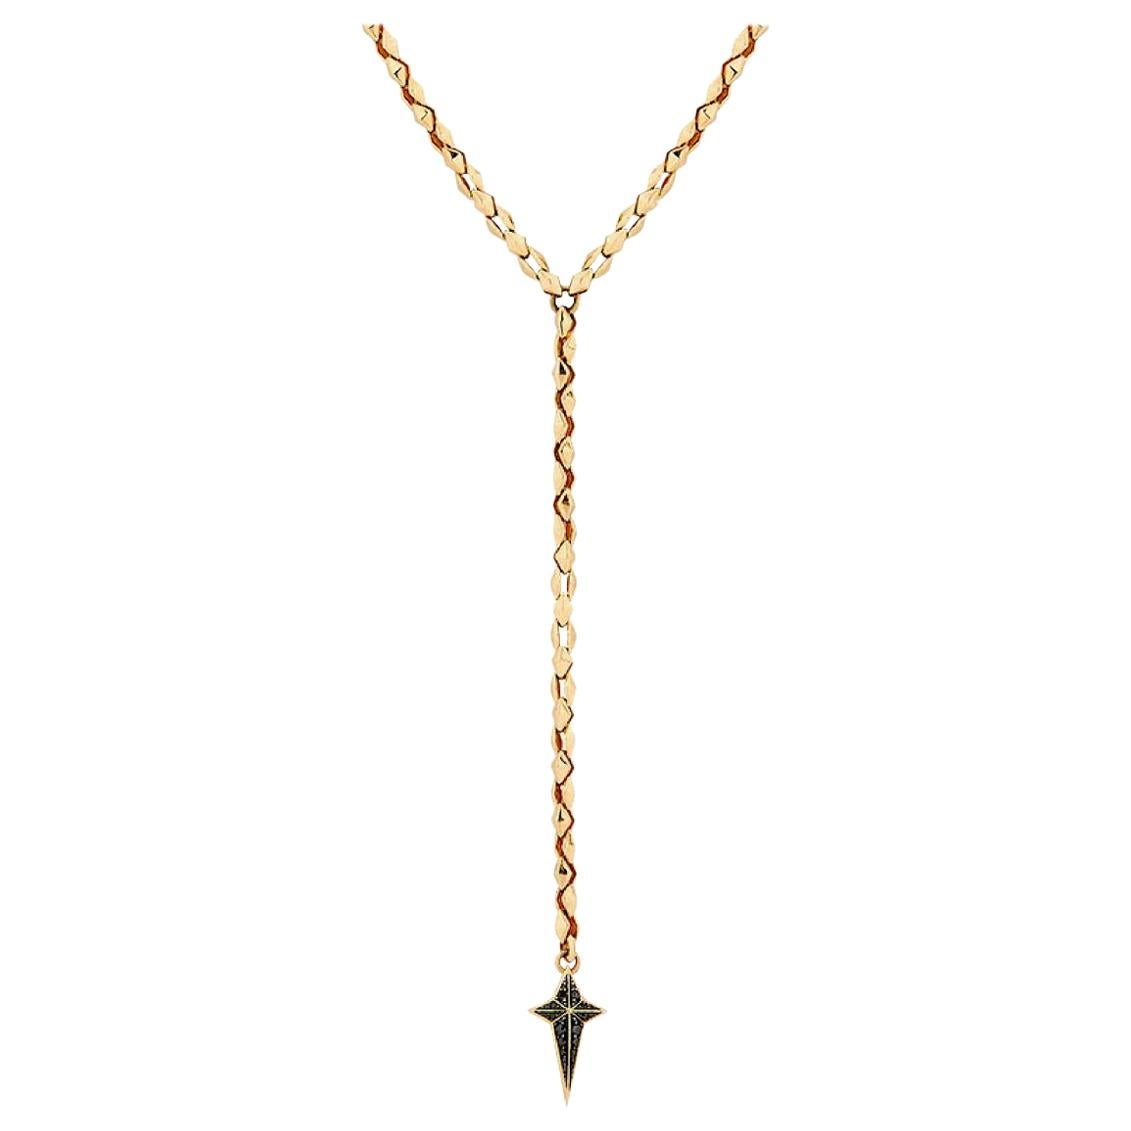 Stephen Webster Superstud Cross 18 Carat Gold Long Chain with Black Diamonds For Sale